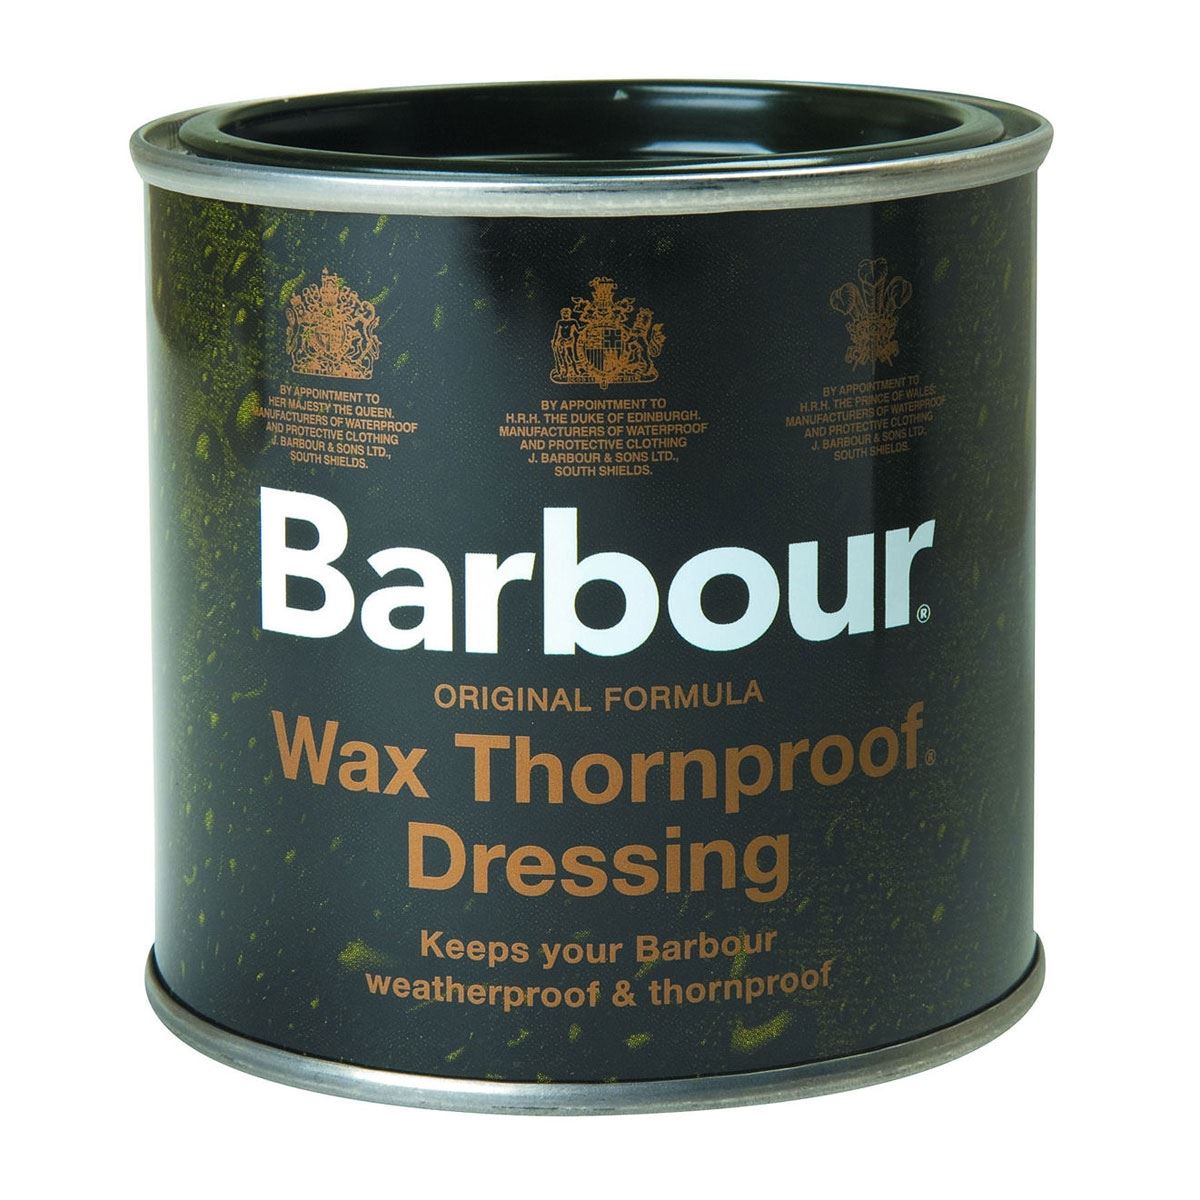 What is Barbour wax made of?